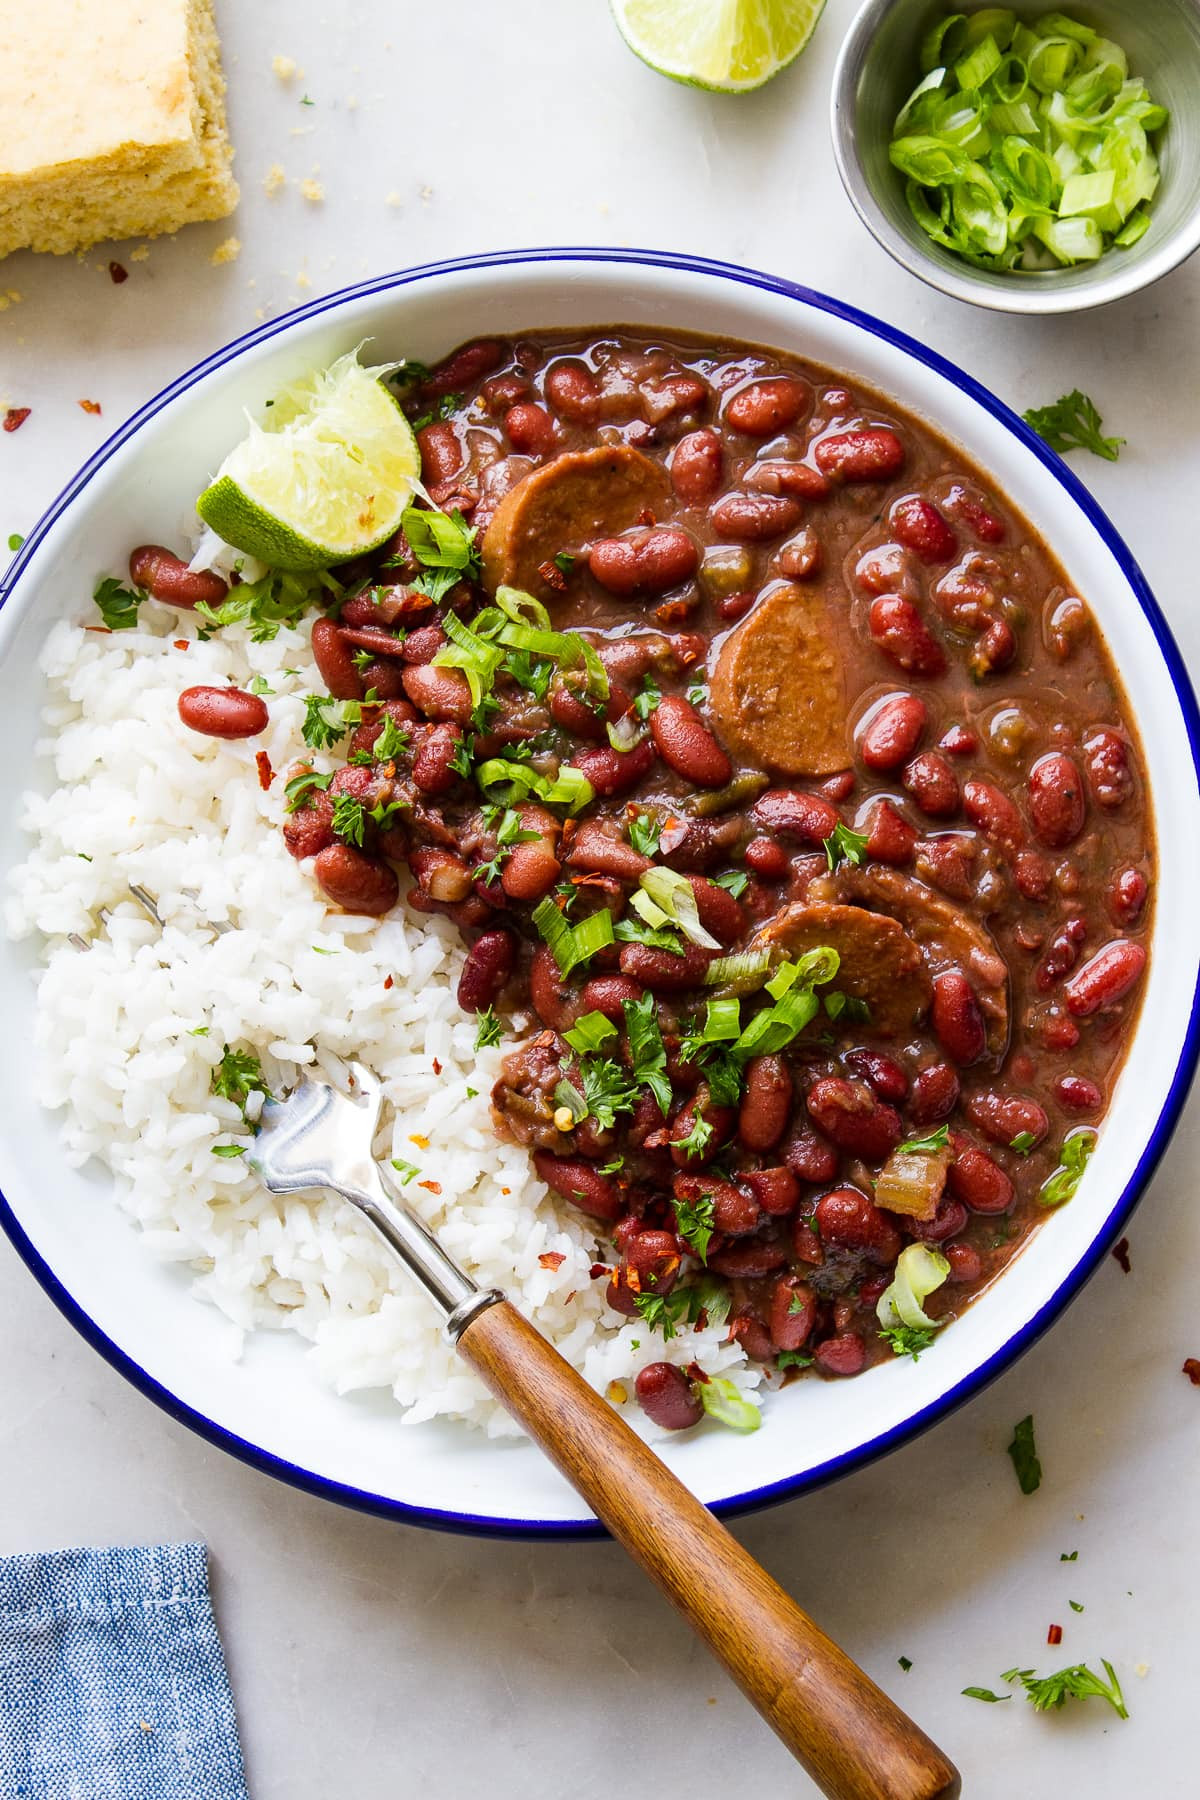 Vegetarian Recipes With Rice
 Instant Pot Red Beans and Rice Vegan The Simple Veganista